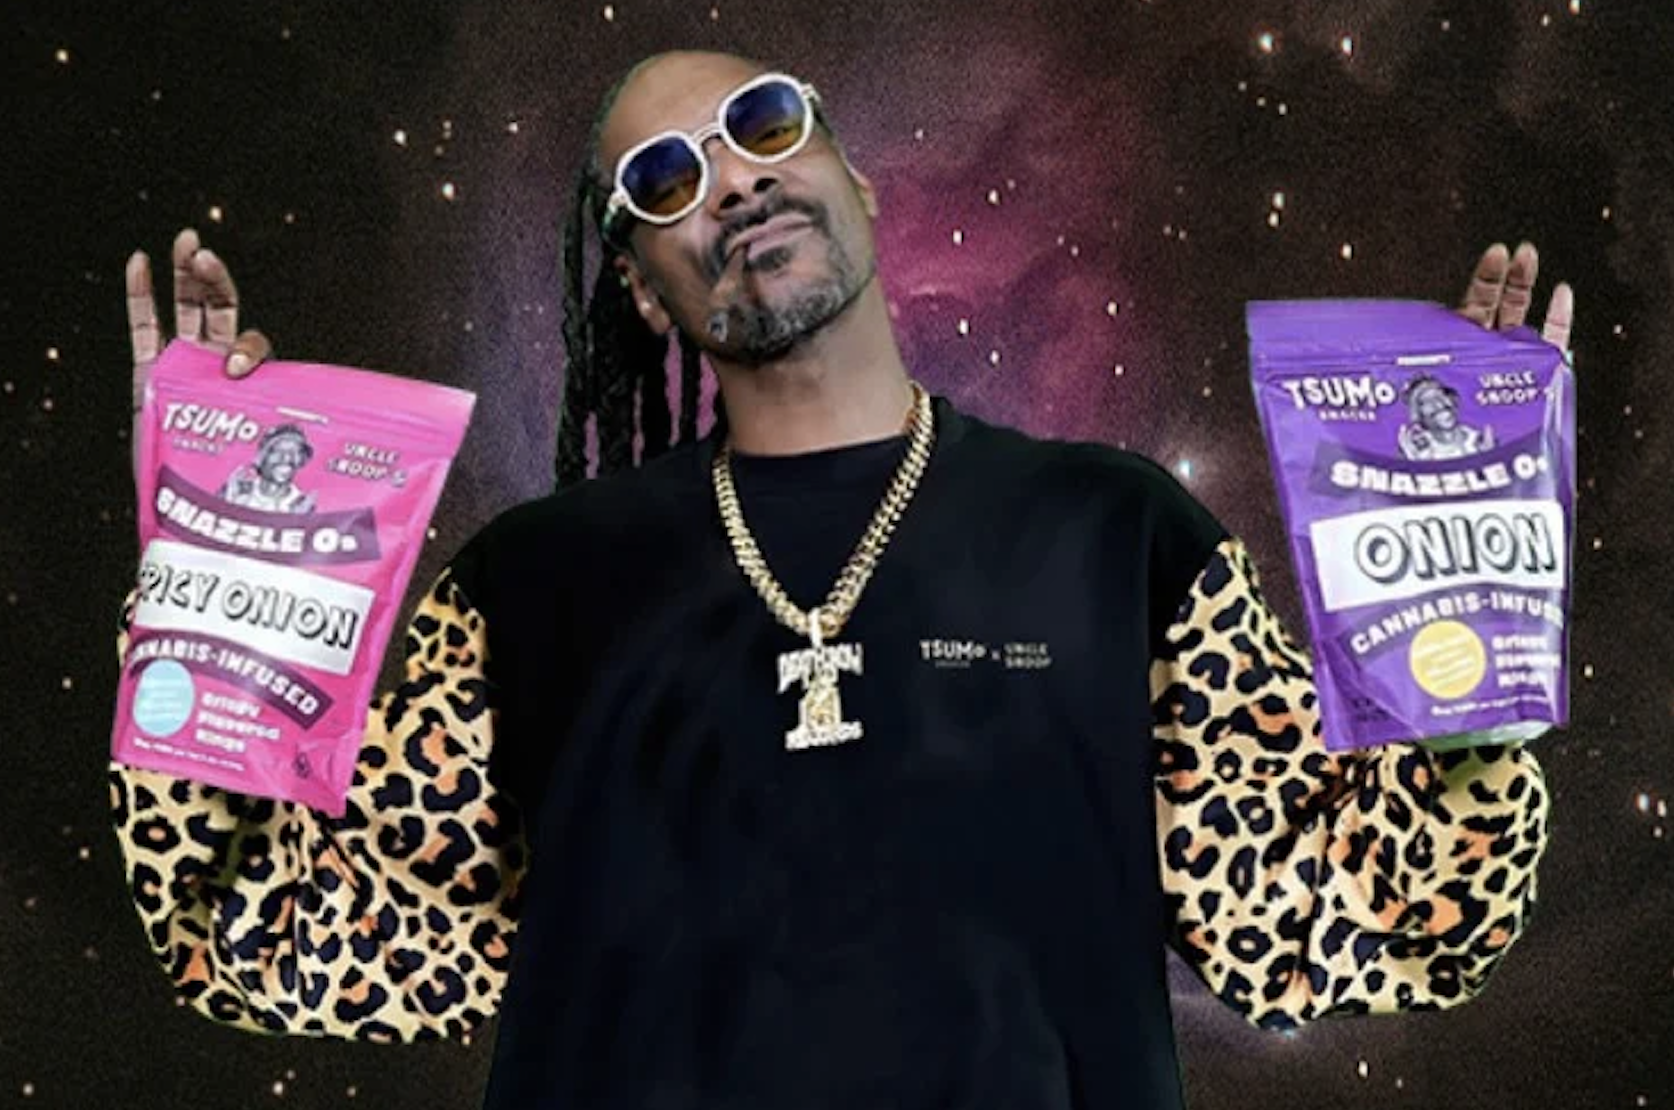 Snoop Dogg Releases Cannabis-infused Snack Inspired By Funyuns